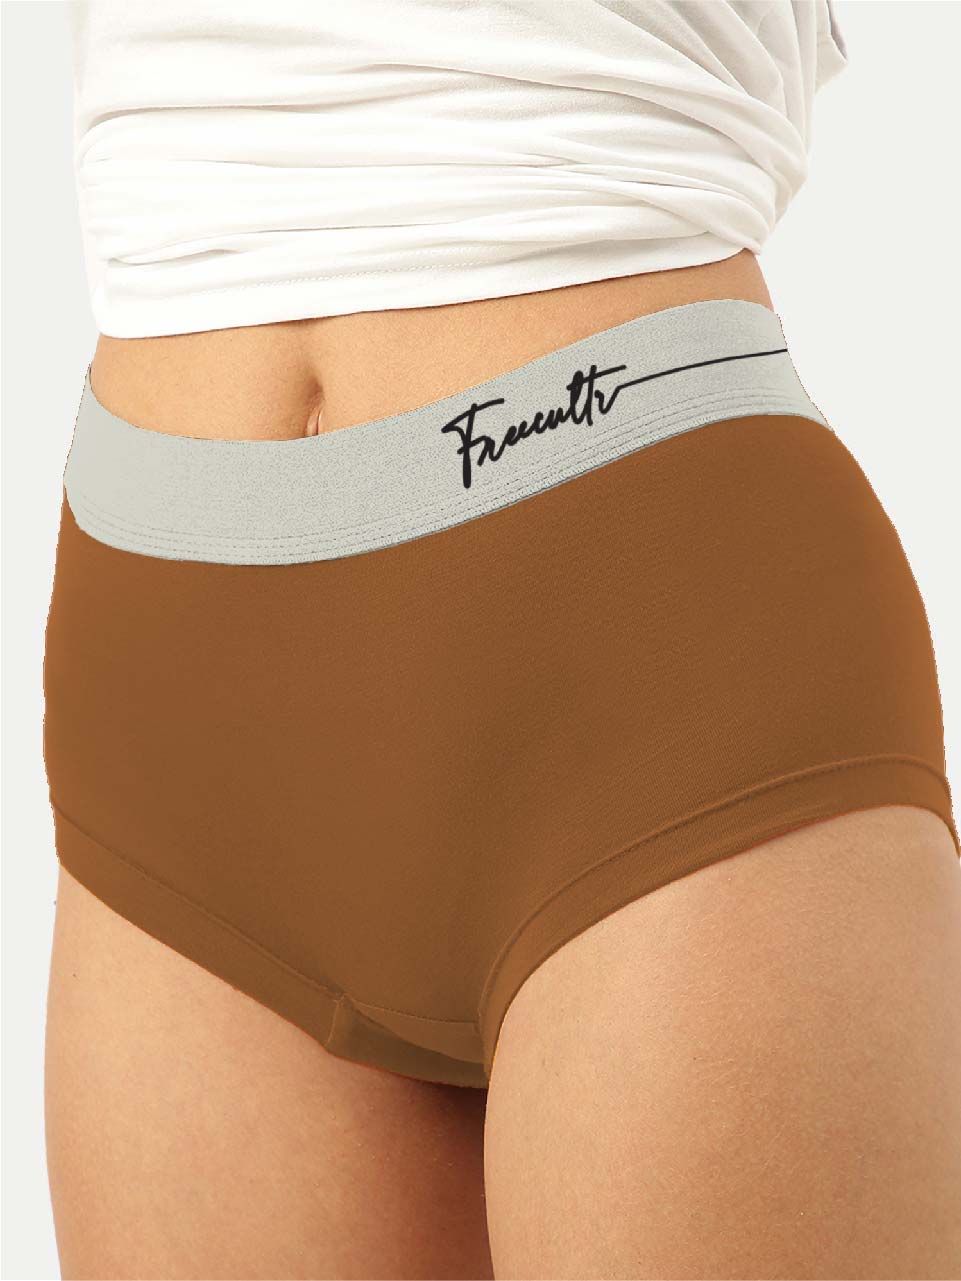 Women's Micro Modal Boxer Brief (Pack of 3)